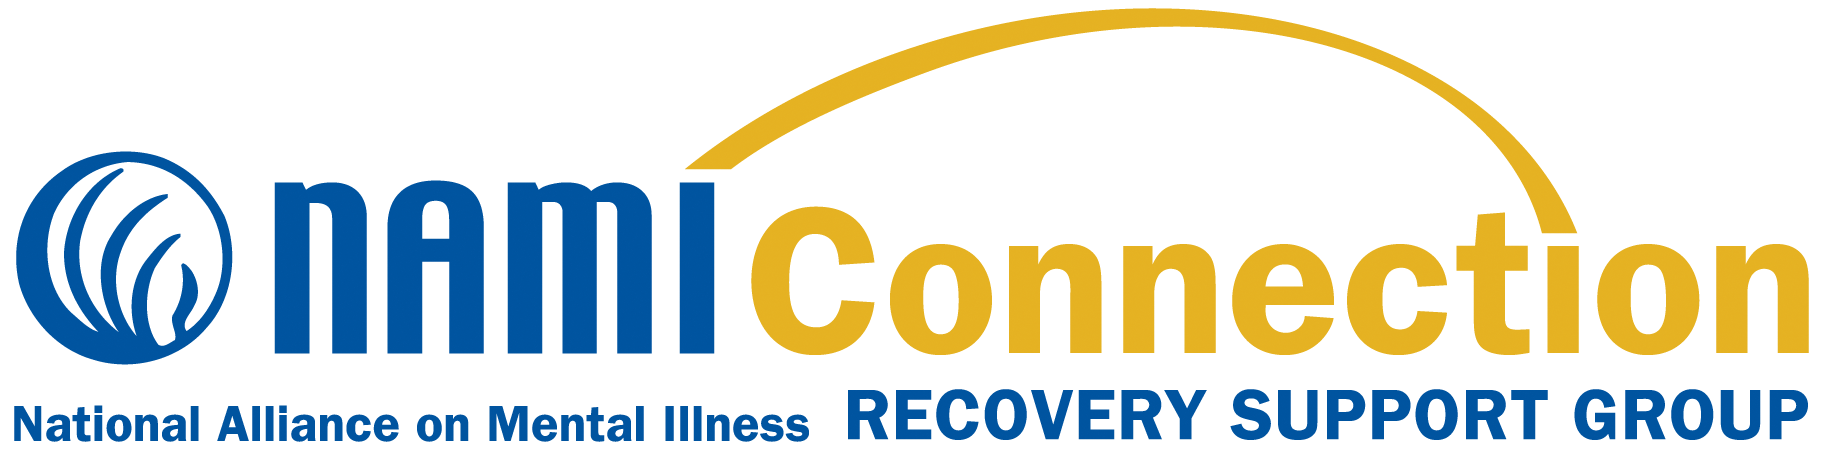 NAMI Connection Recovery Support groups in the Houston Area